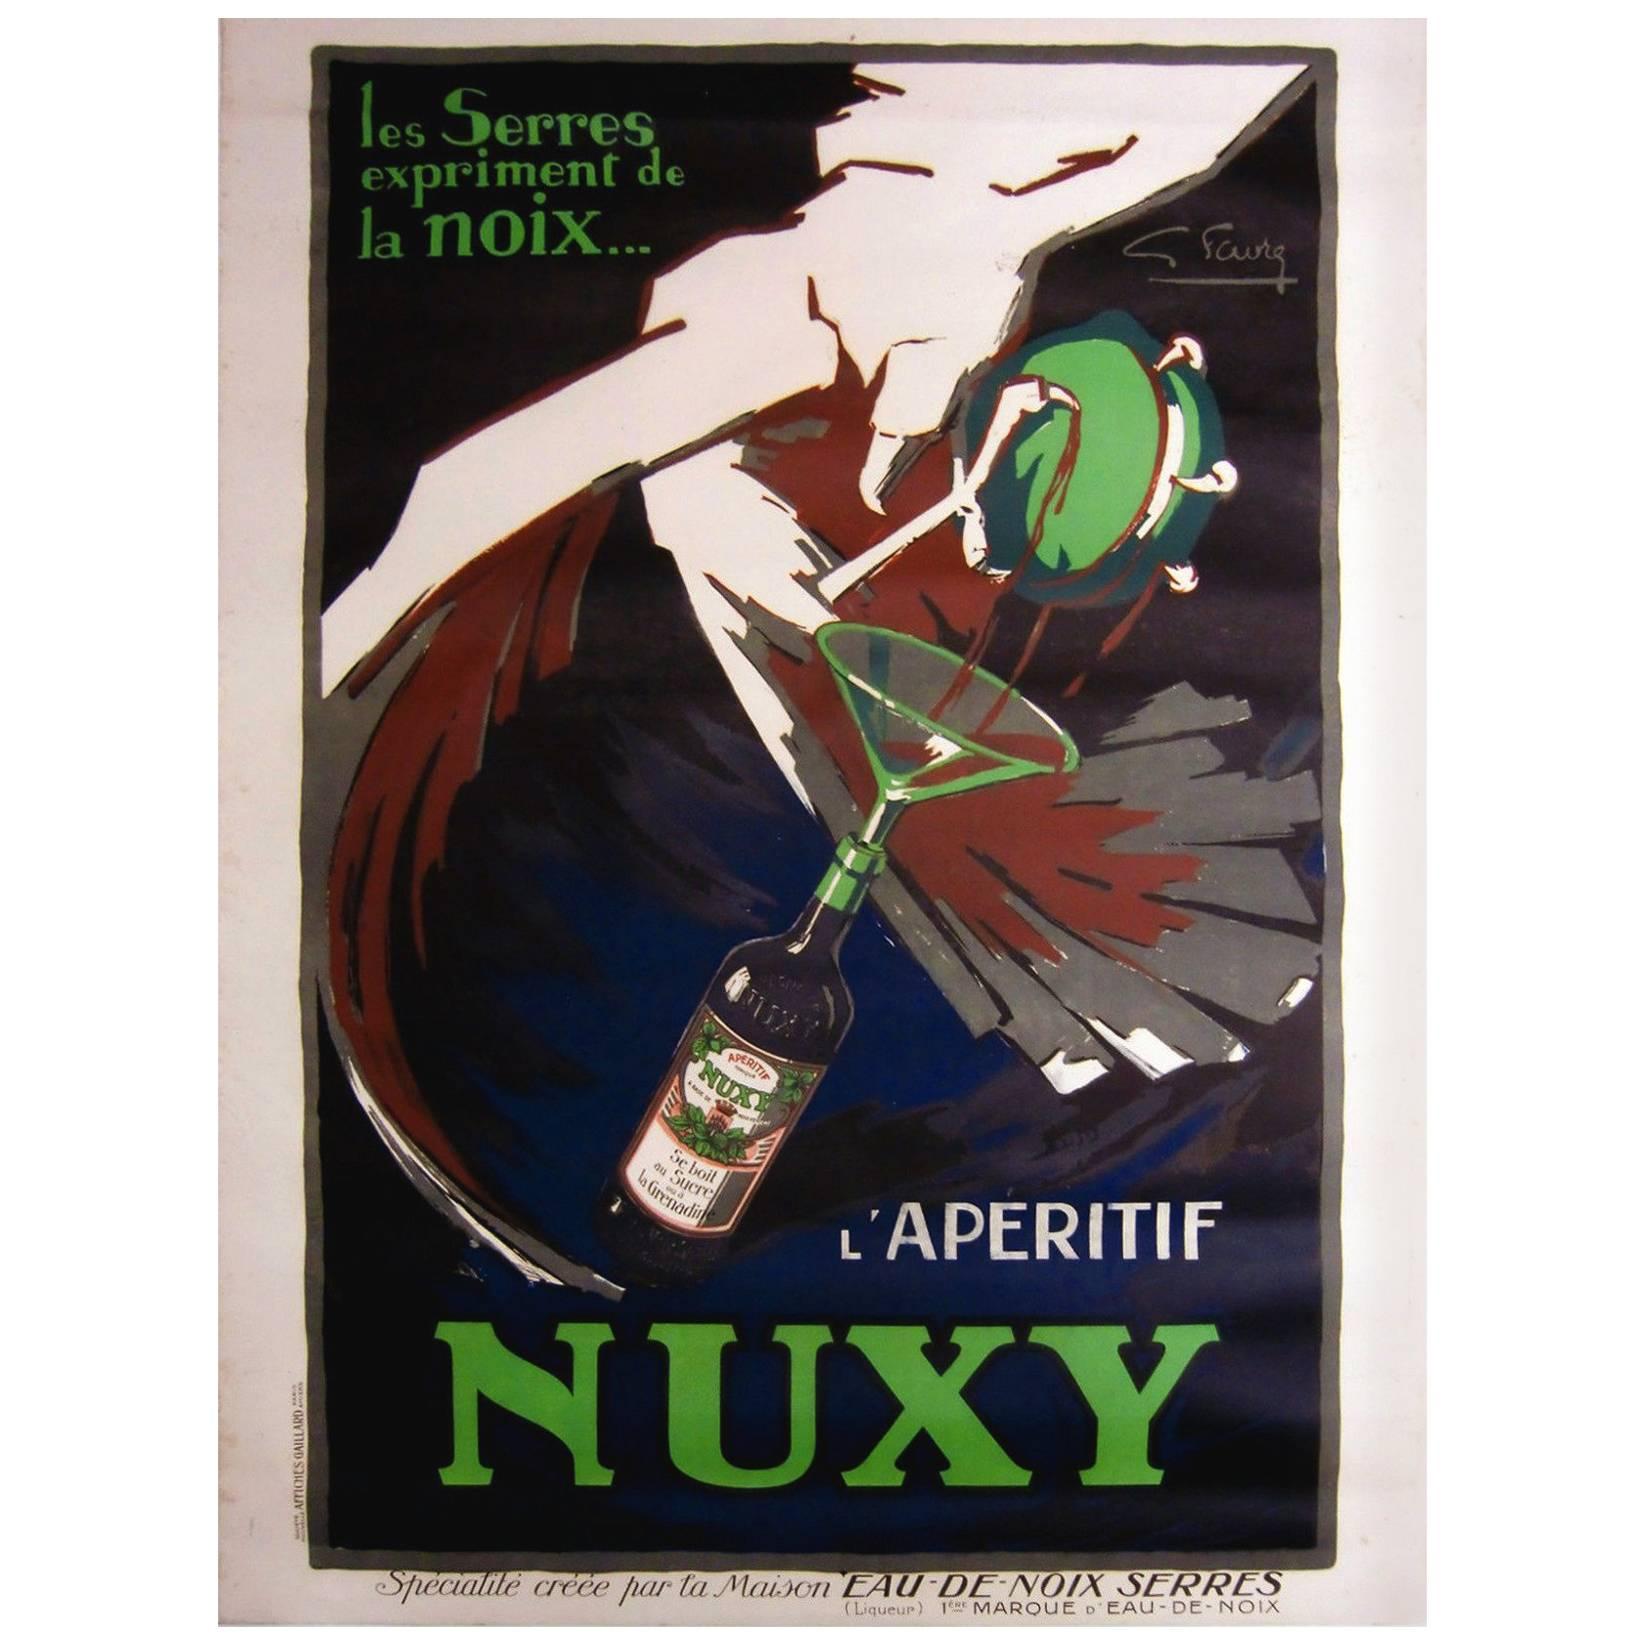 Original Vintage Art Deco Drink Advertising Poster for L'aperitif Nuxy by Favre